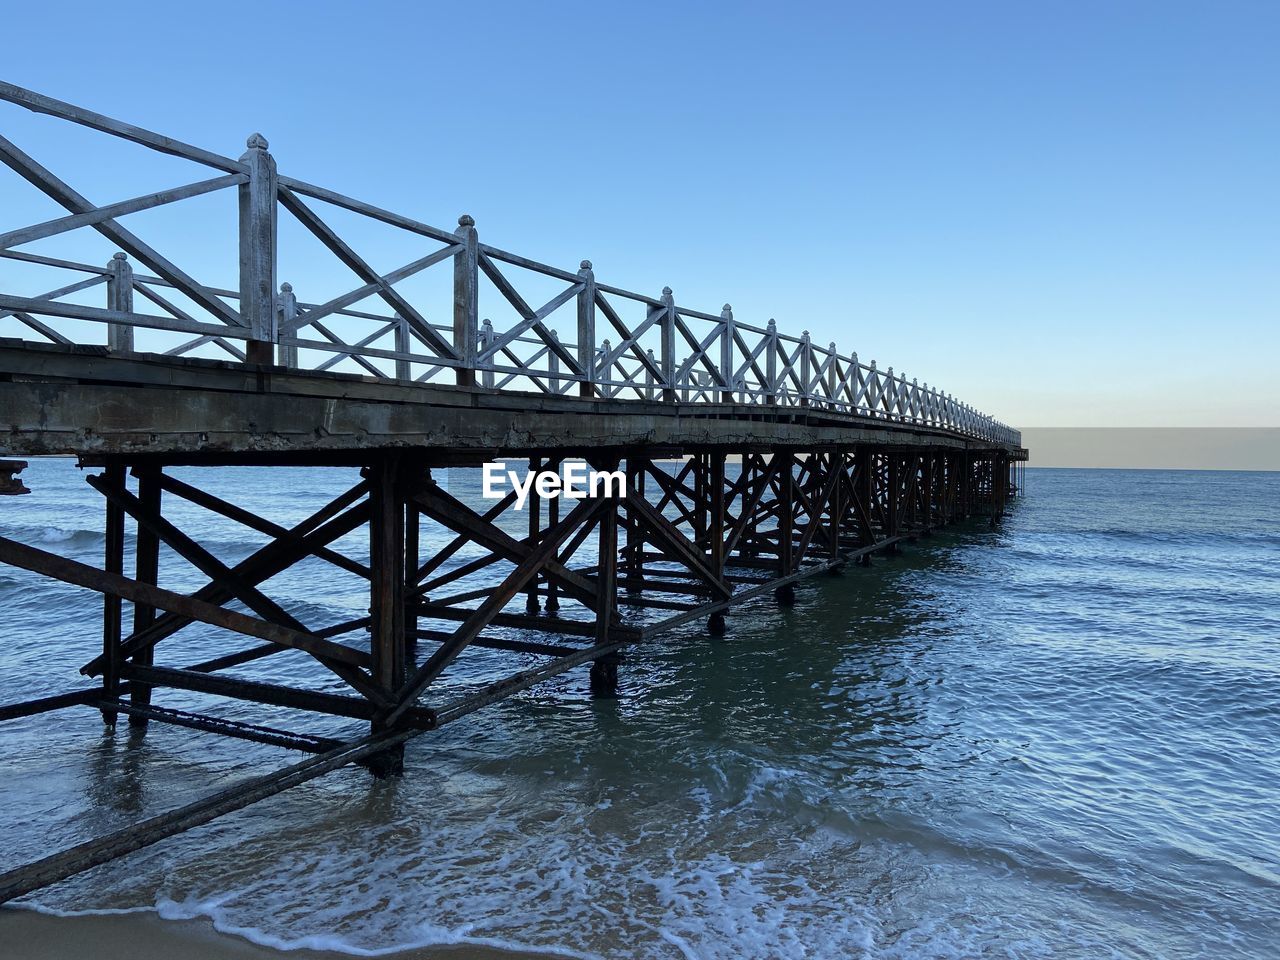 water, sea, sky, architecture, built structure, pier, nature, ocean, beach, blue, scenics - nature, land, bridge, clear sky, beauty in nature, coast, no people, shore, horizon, transportation, wave, travel destinations, outdoors, horizon over water, tranquility, environment, reflection, day, travel, tranquil scene, idyllic, seascape, coastline, tourism, motion